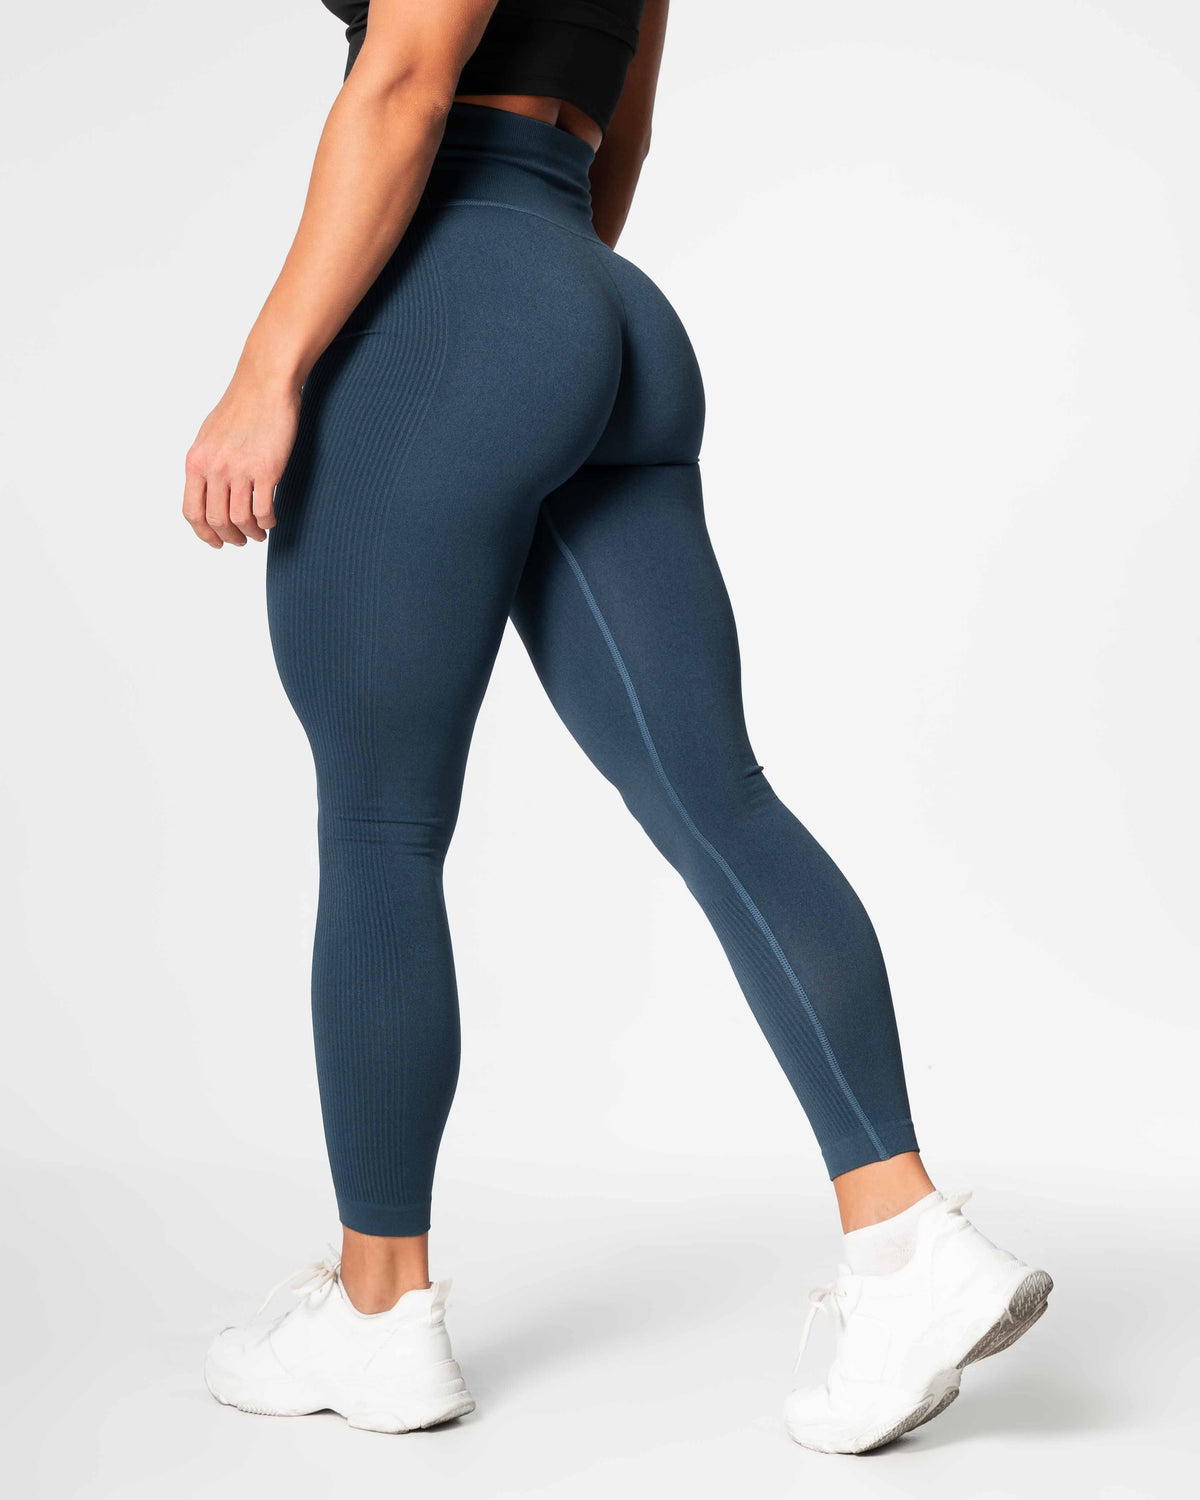 Workout Leggings, Tights & Bottoms for the gym